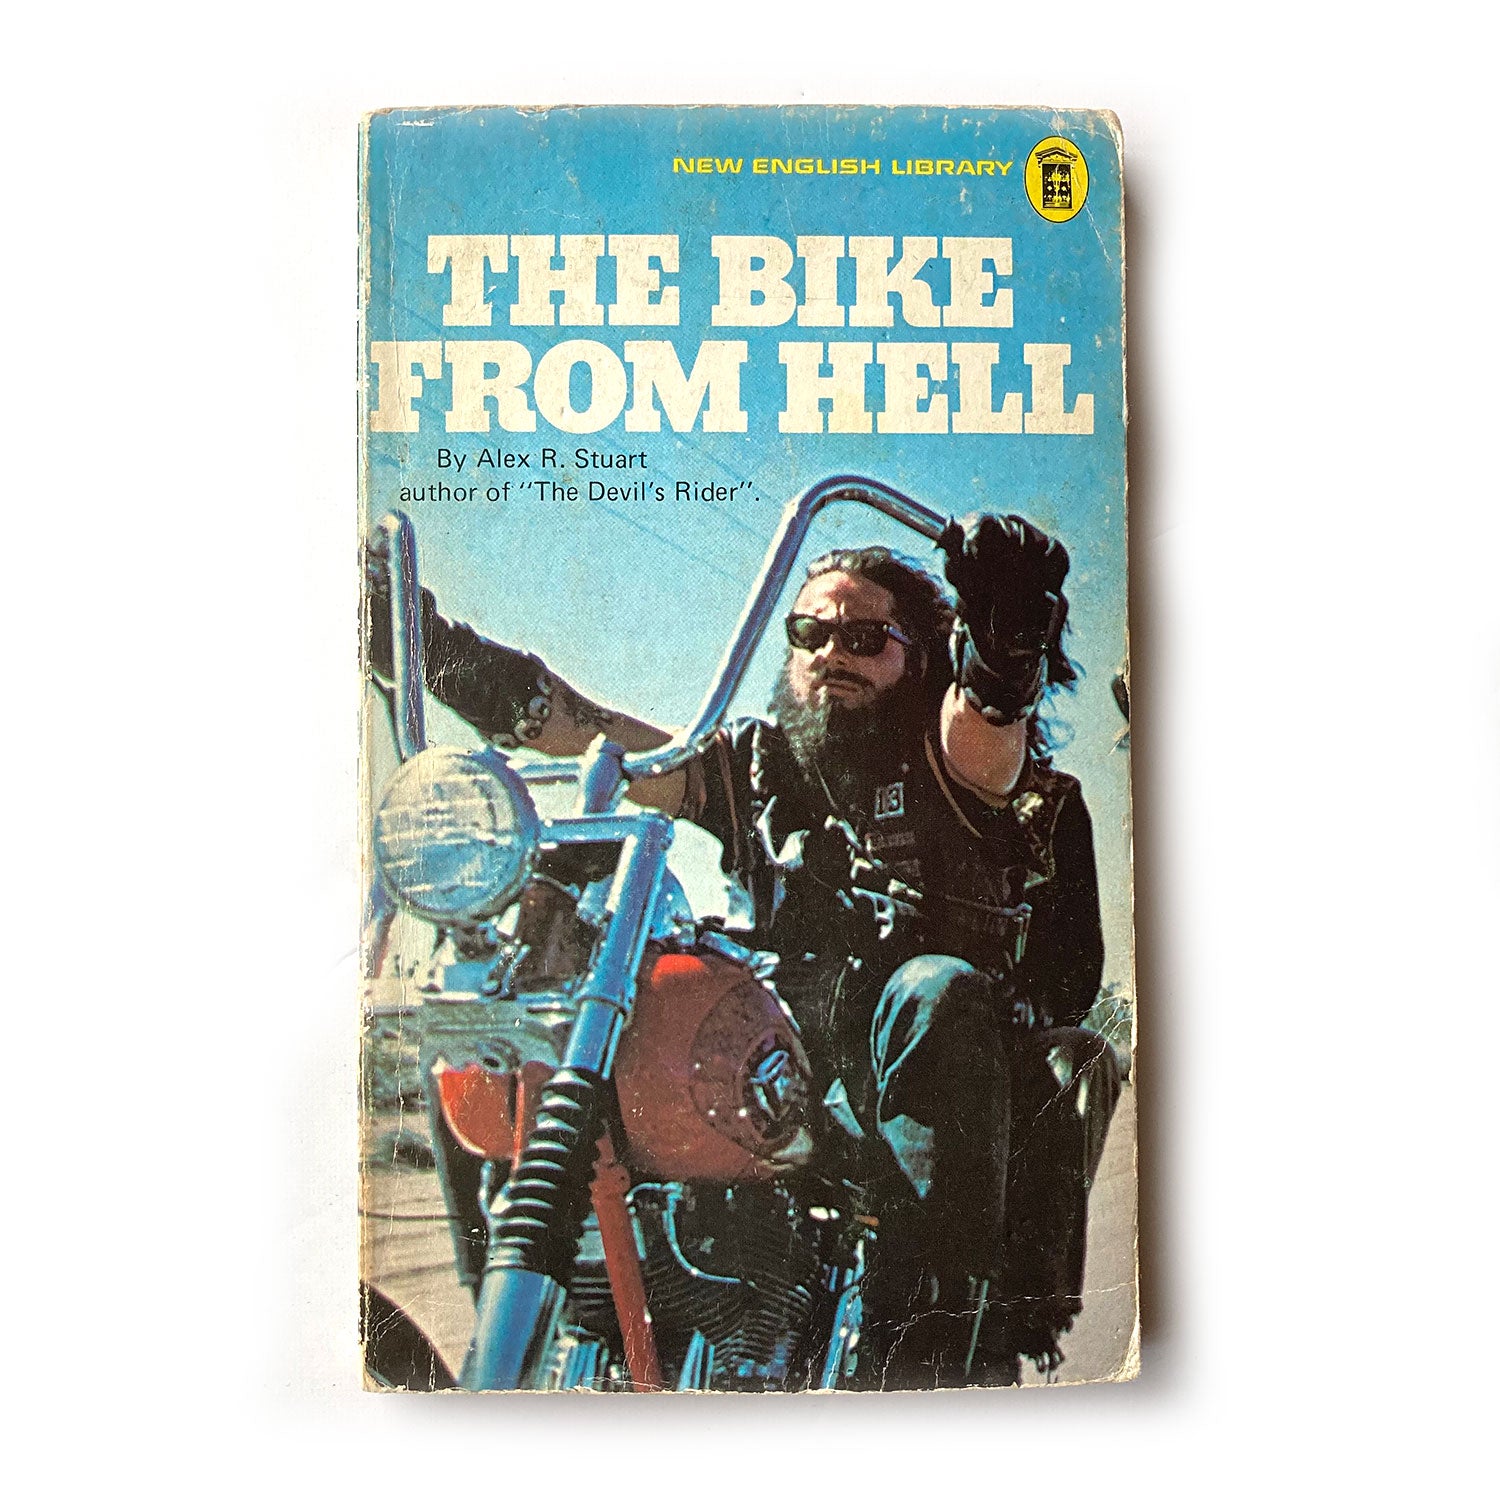 The Bike from Hell by Alex R. Stuart, First Edition New English Library paperback, 1973